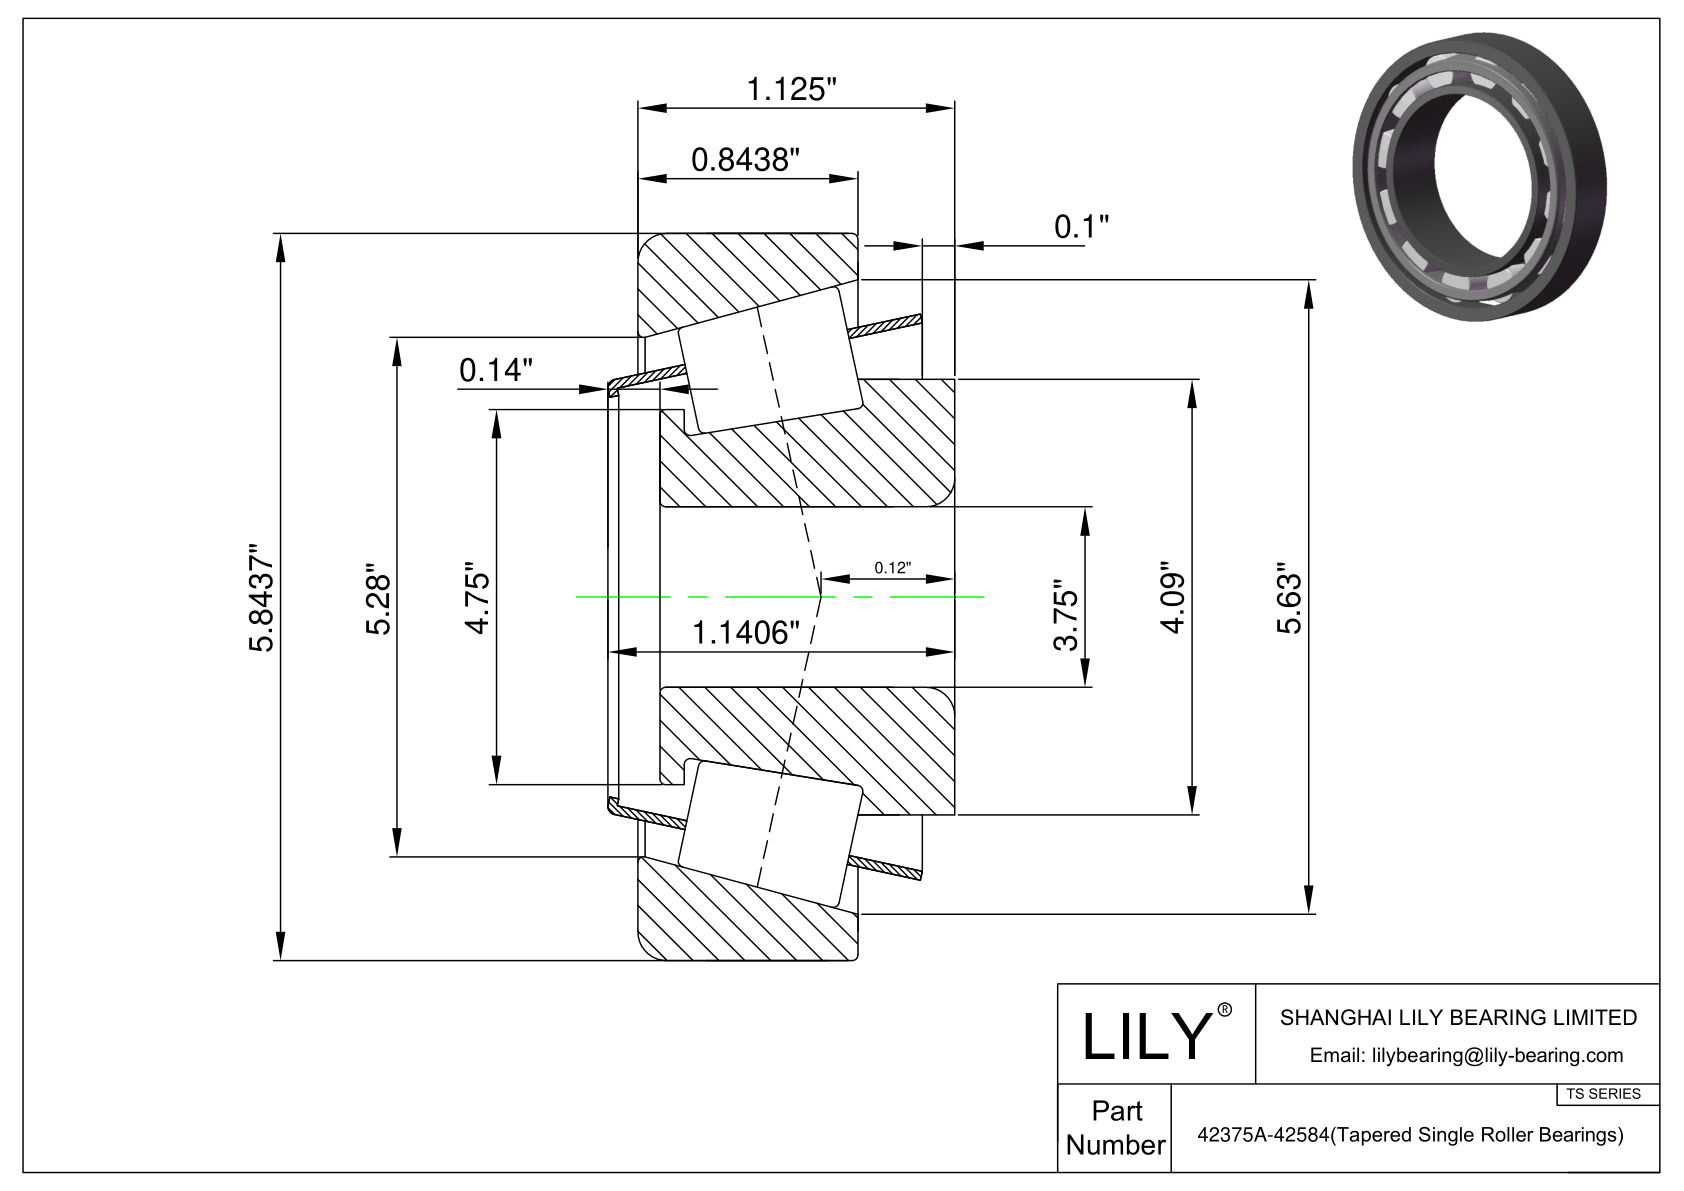 42375A-42584 TS (Tapered Single Roller Bearings) (Imperial) cad drawing